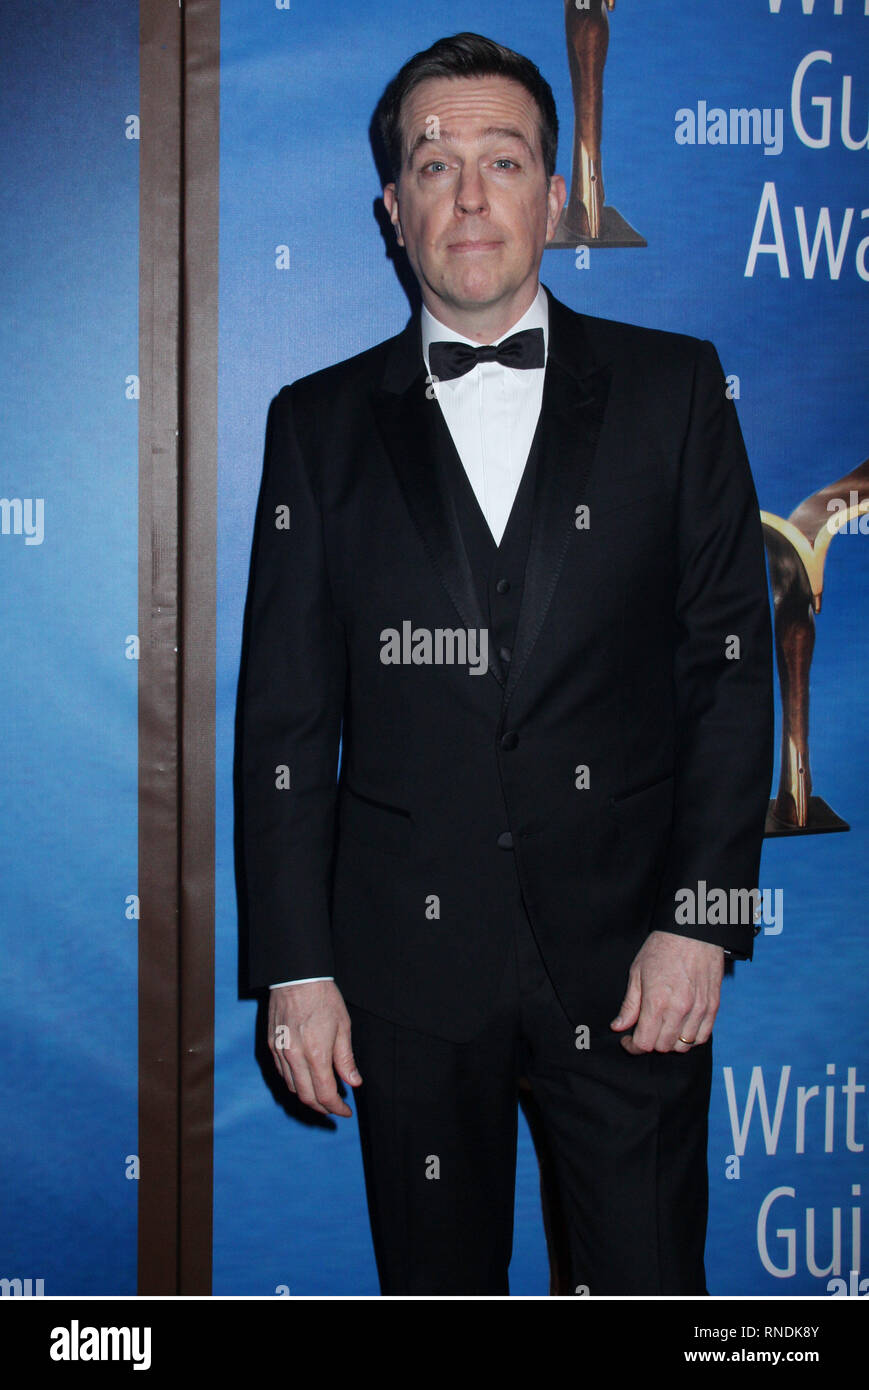 Ed Helms  02/17/2019 2019 Writers Guild Awards held at The Beverly Hilton in Beverly Hills, CA Photo by Izumi Hasegawa / HNW / PictureLux Stock Photo